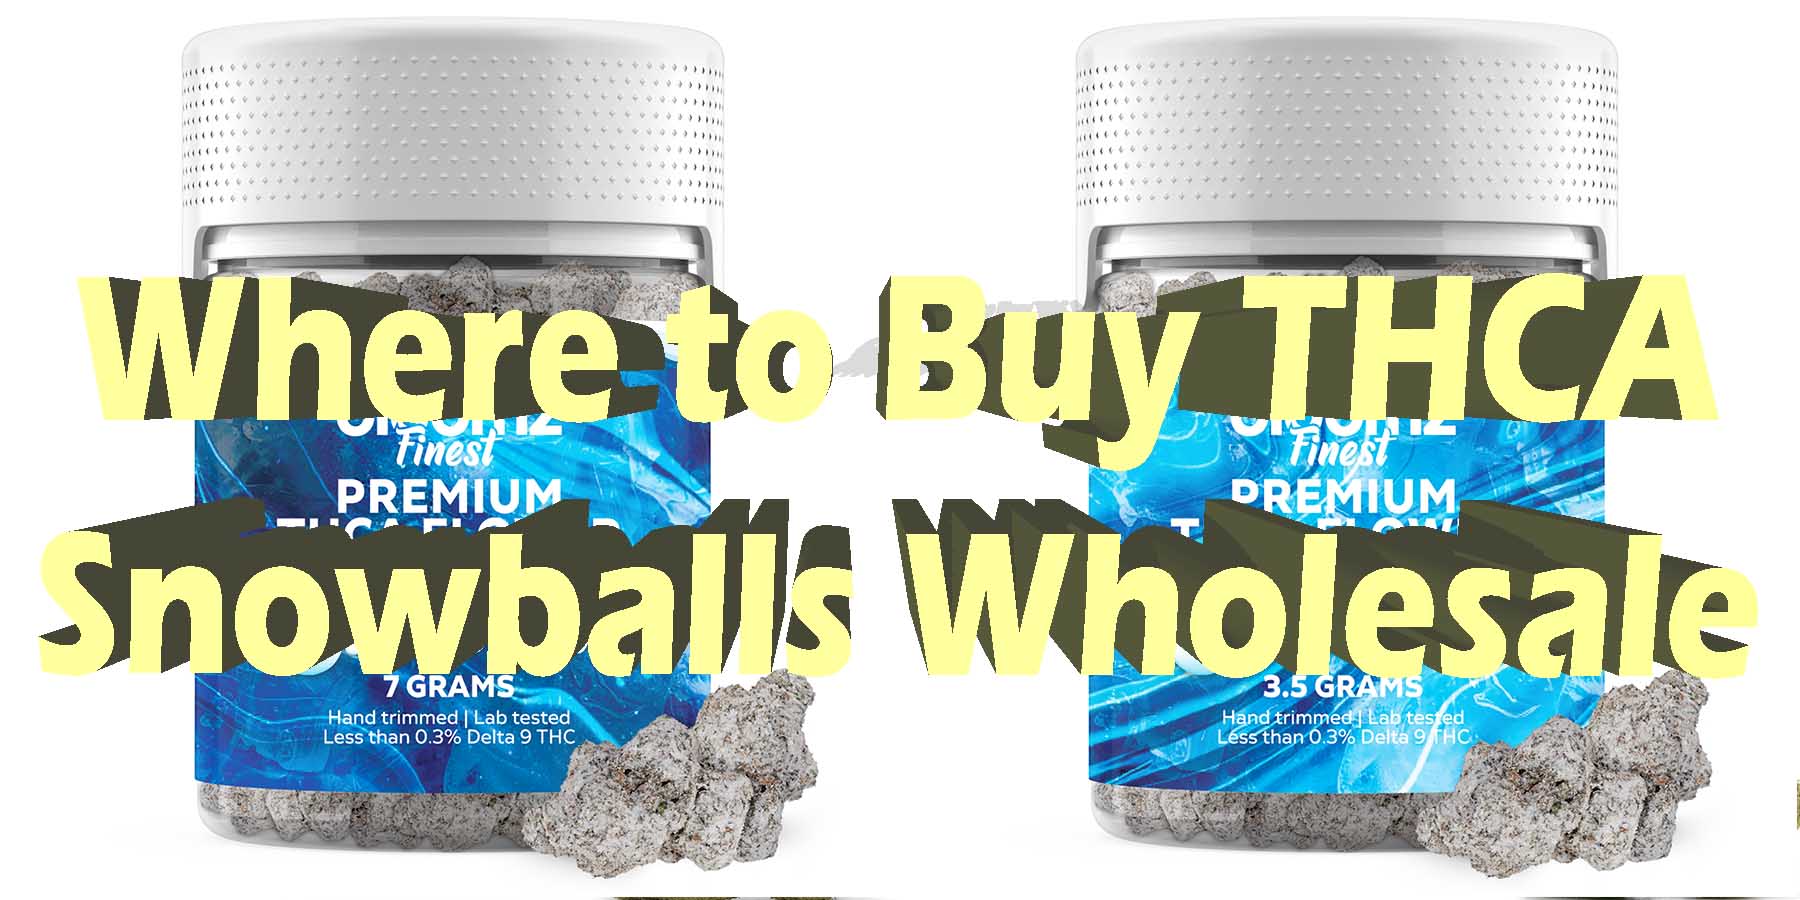 Where to Buy THCA Snowballs Wholesale and How to Take Them Safely LowestPrice Coupon Discount For Smoking Best High Smoke Shop Online Near Me Bloomz